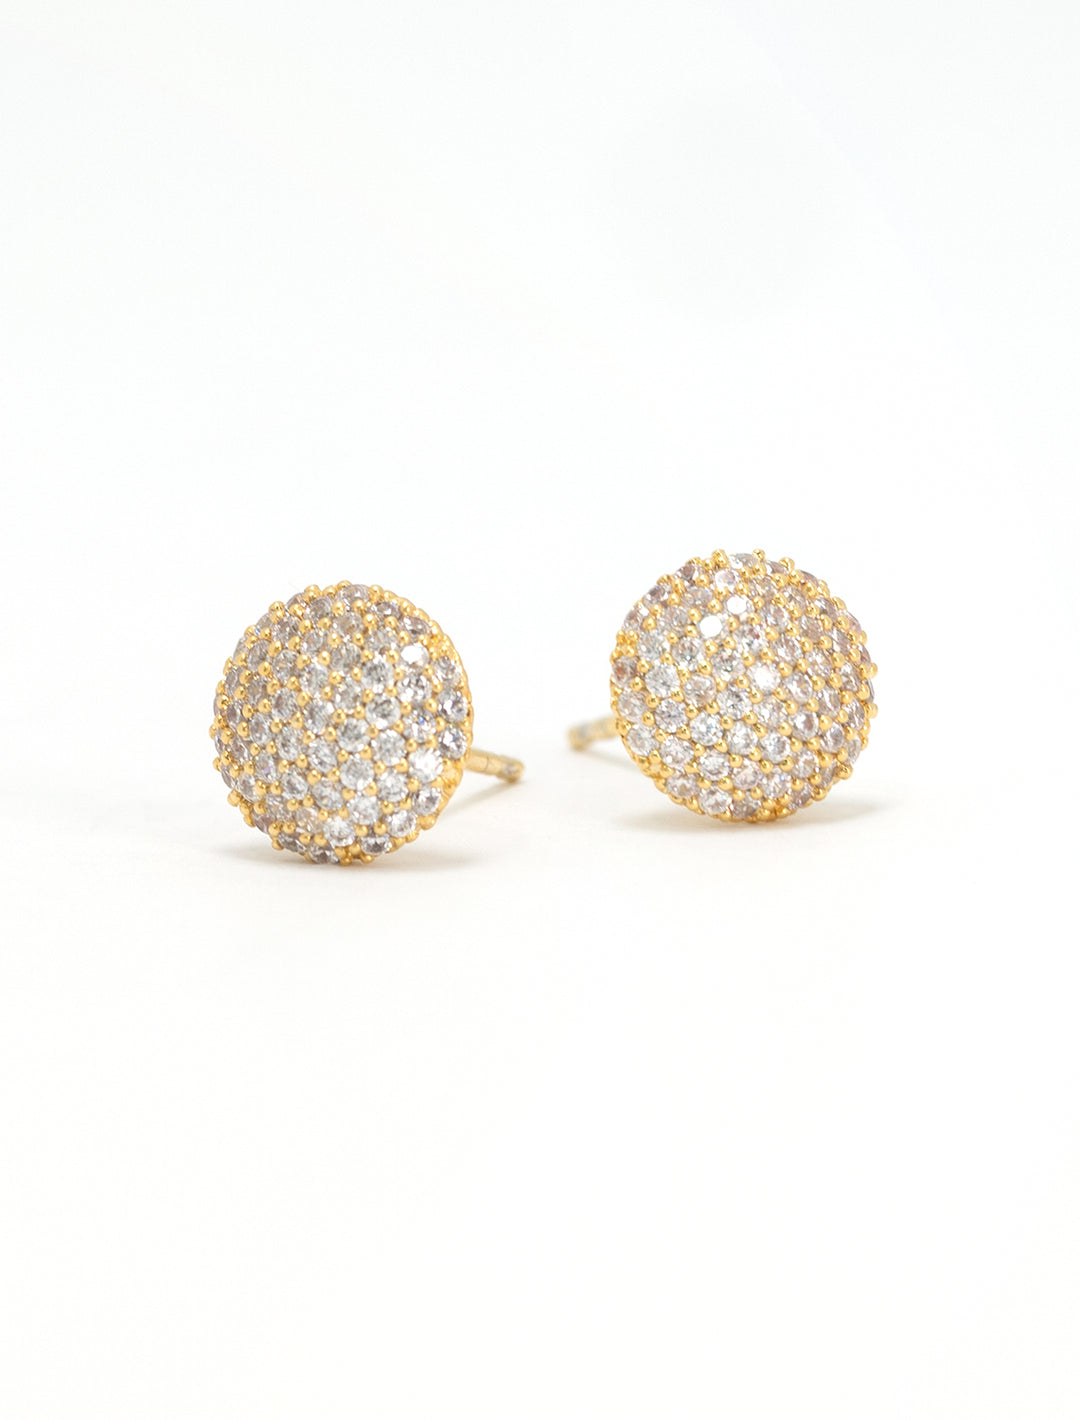 Close-up view of Tai's cz button studs in gold.